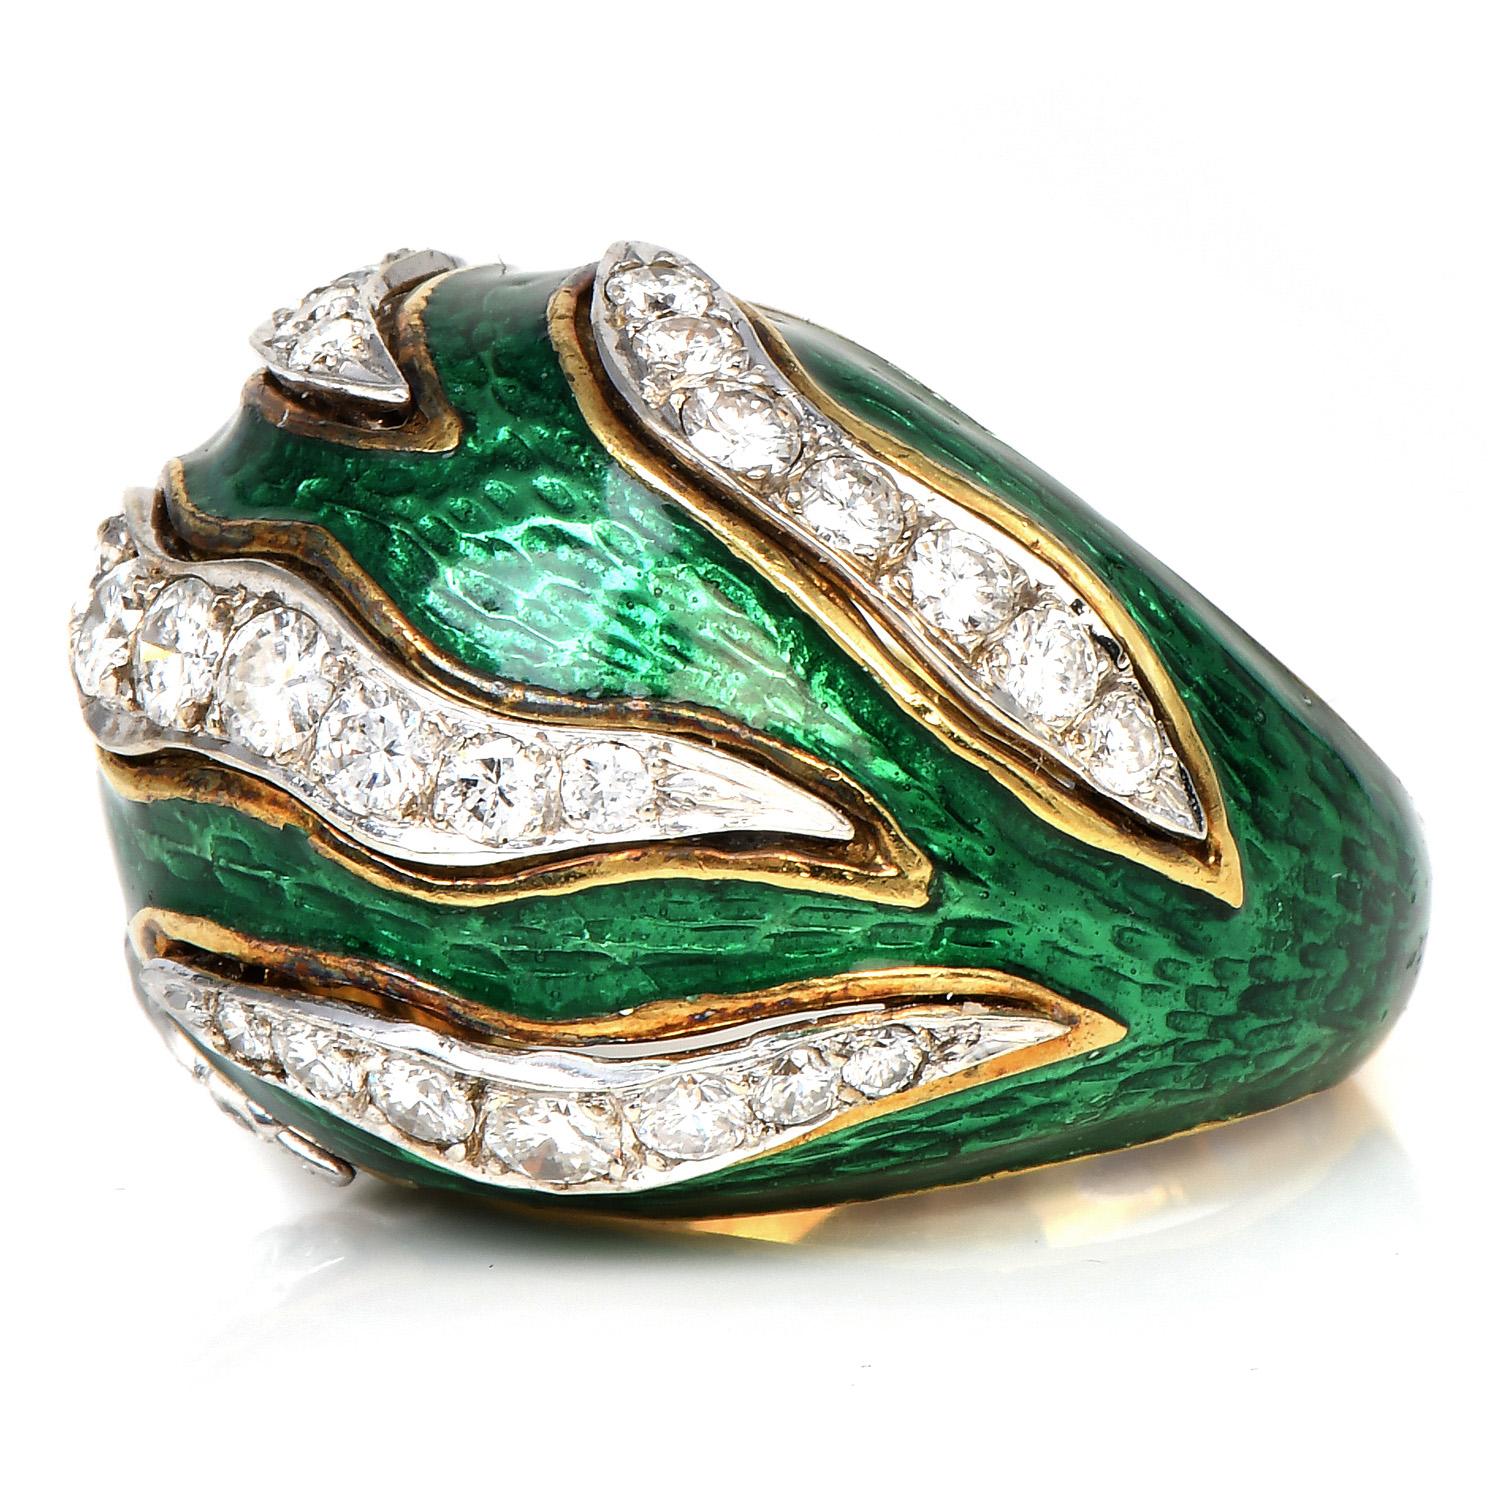 Vintage Retro Diamond Green Enamel 18K Gold Channeled Dome Cocktail Ring In Excellent Condition For Sale In Miami, FL